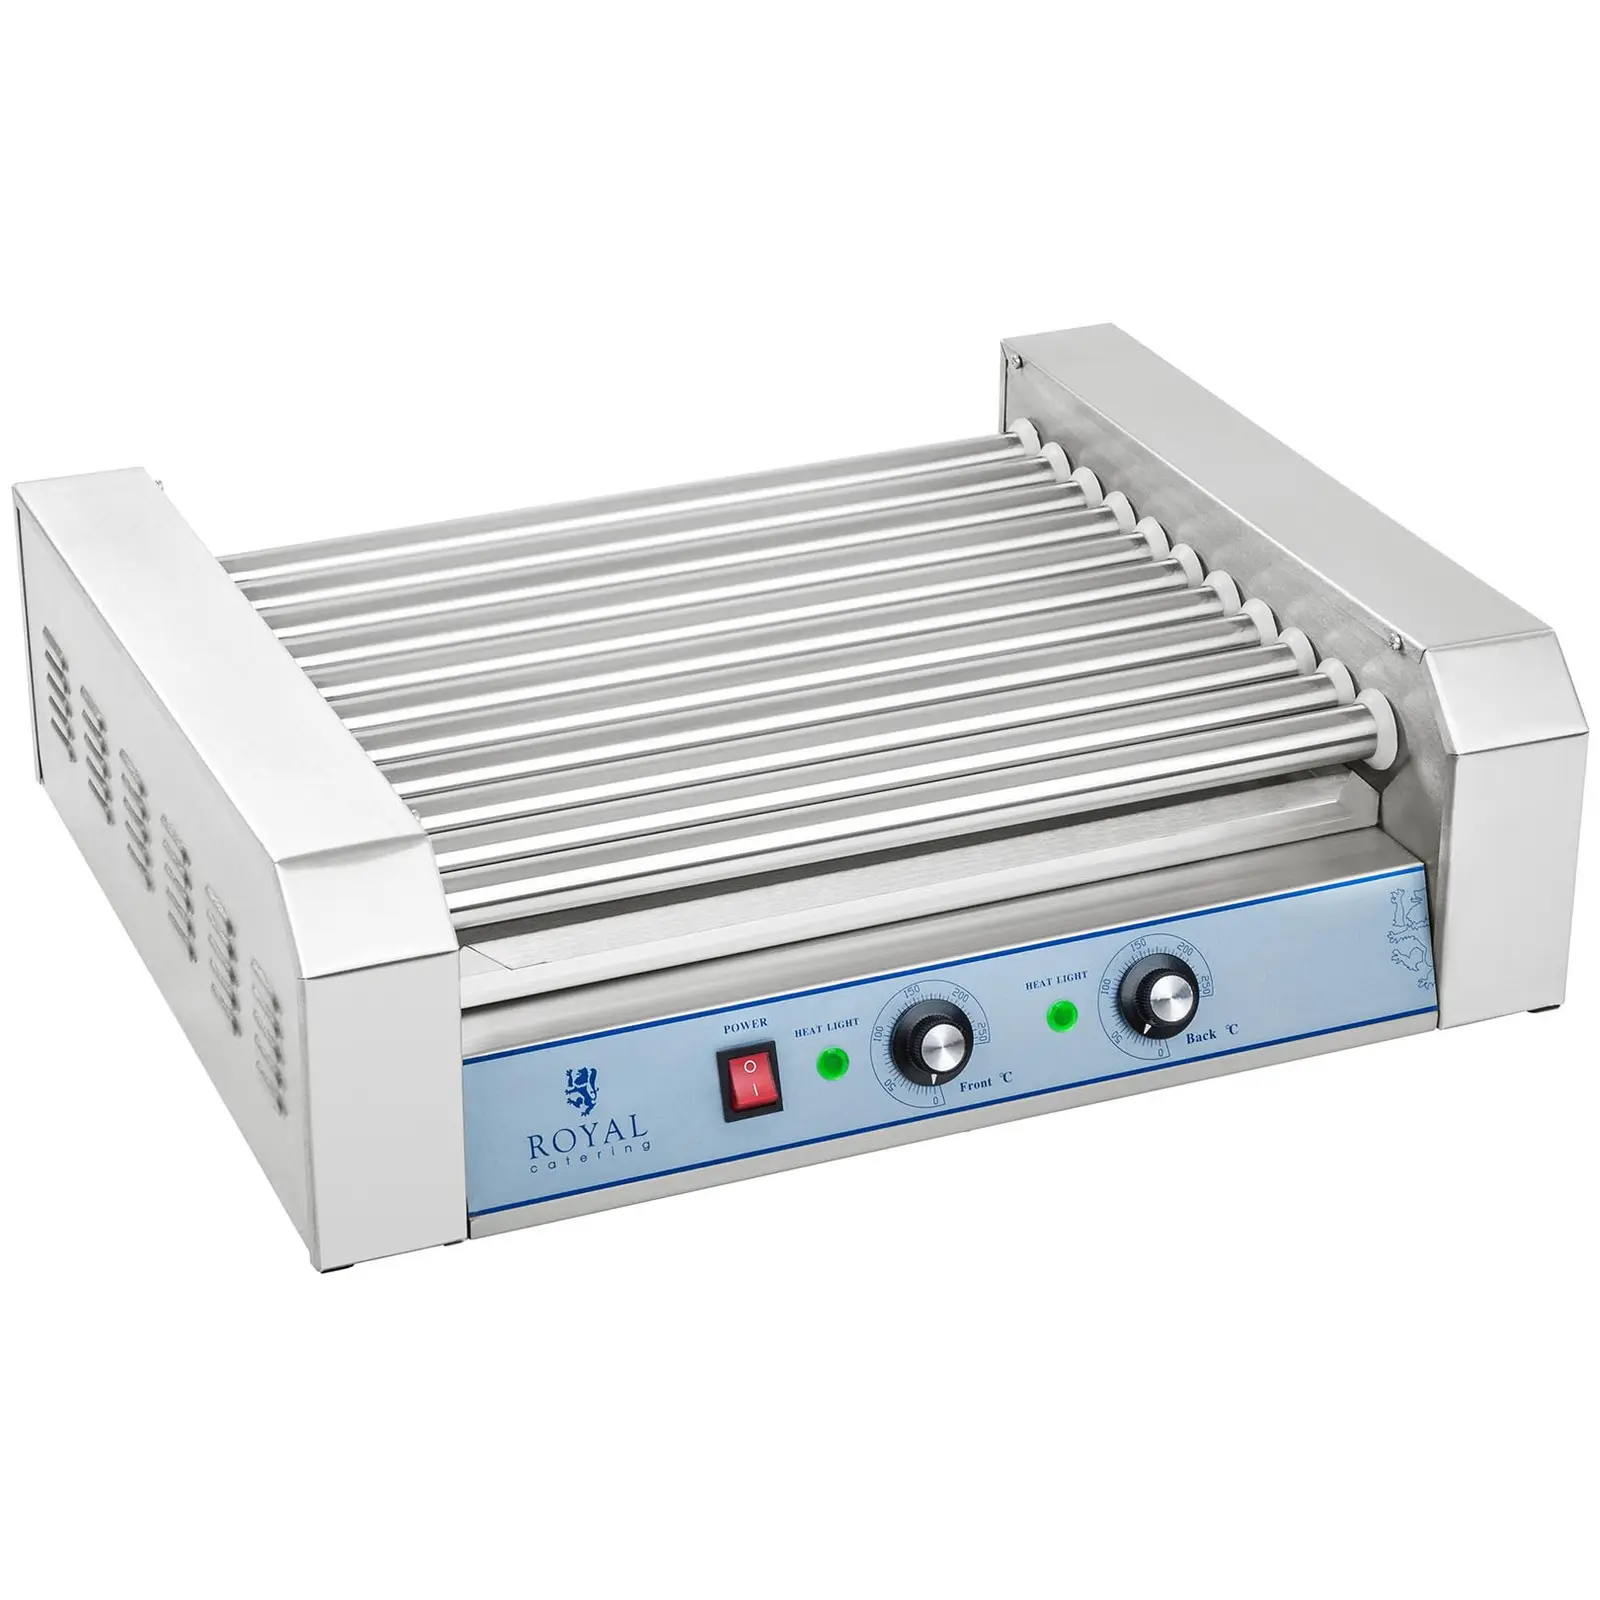 Hot Dog Grill - 11 rollers - stainless steel